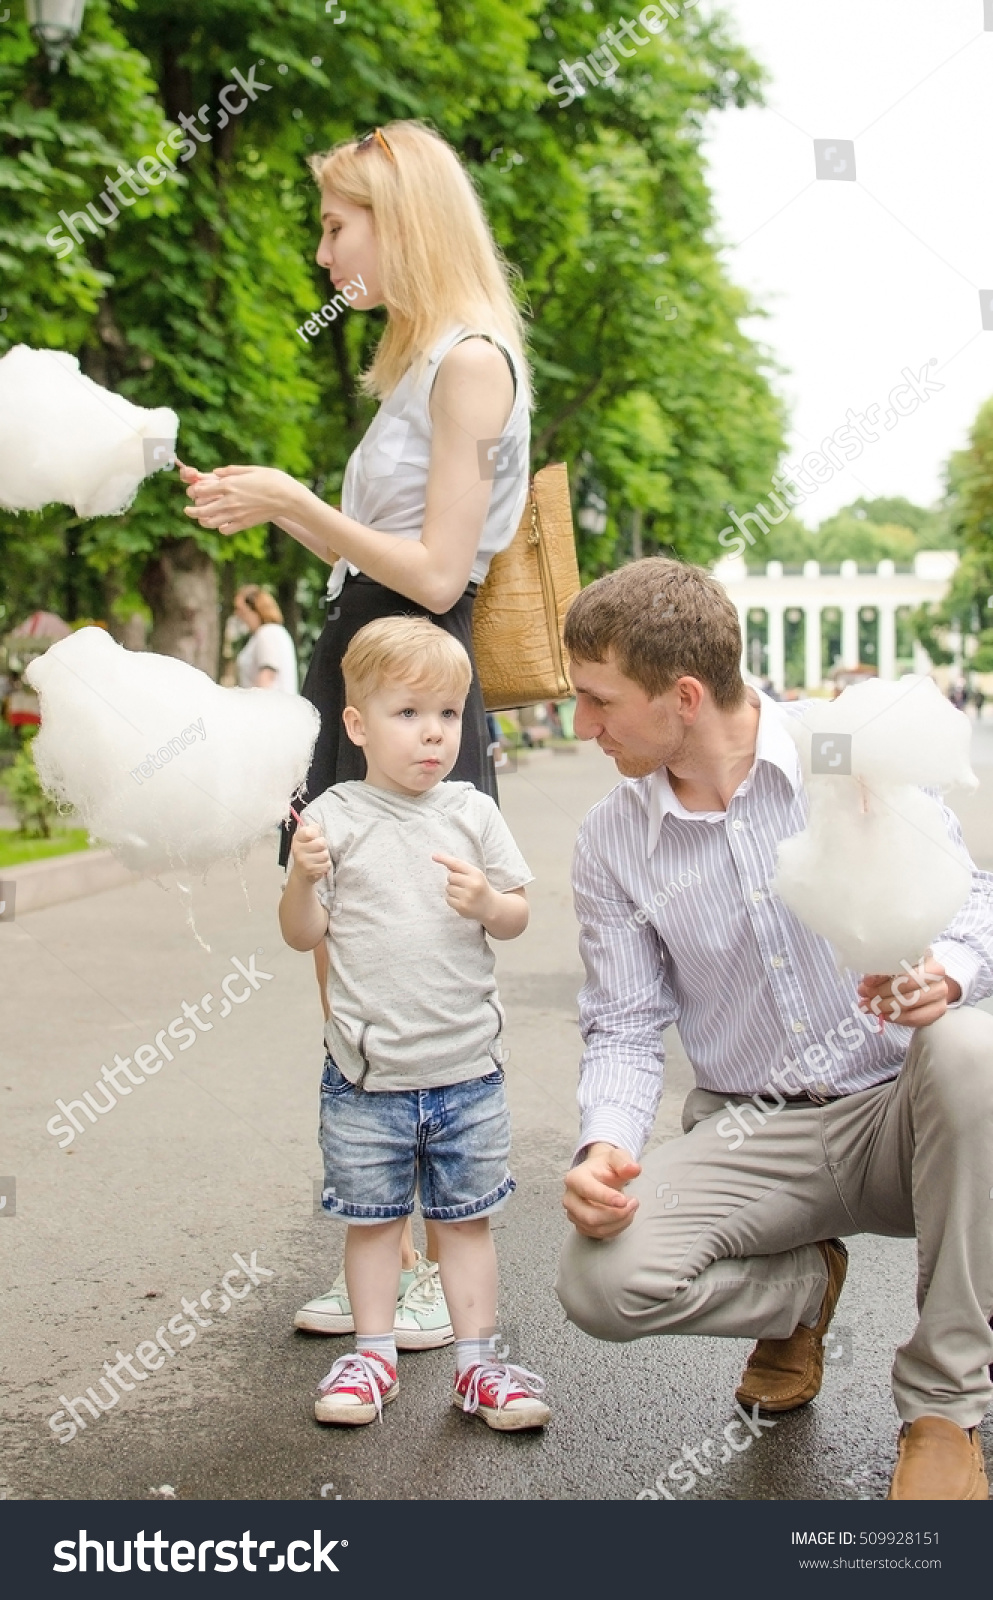 Young family is eating cotton candy in the park #509928151